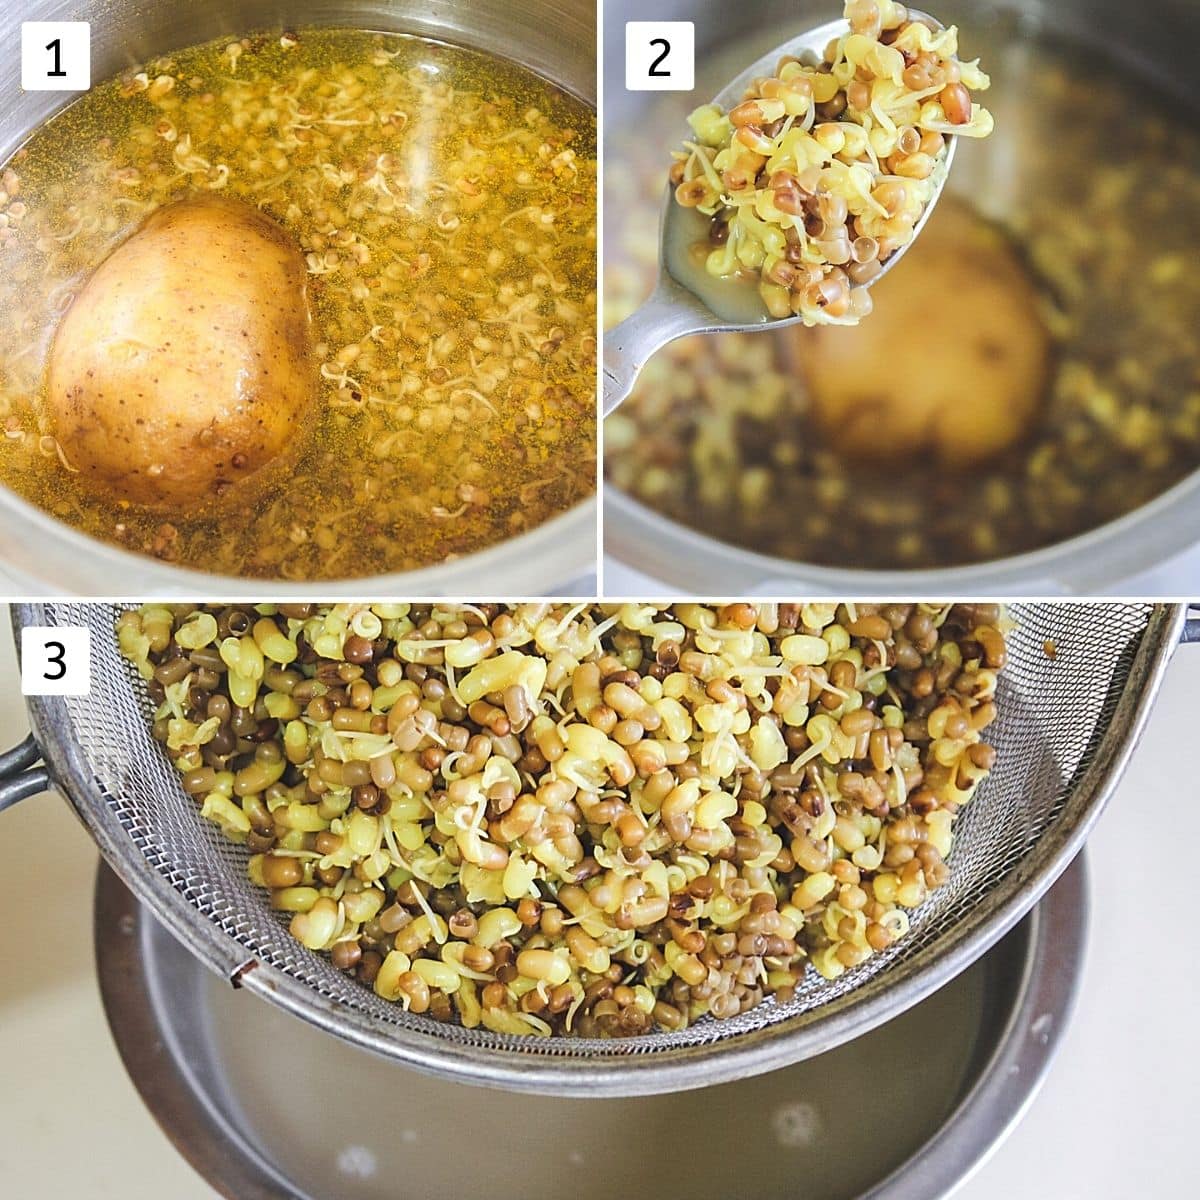 Collage of 3 images showing sprouted matki and potato in a pressure cooker, cooked sprouts.